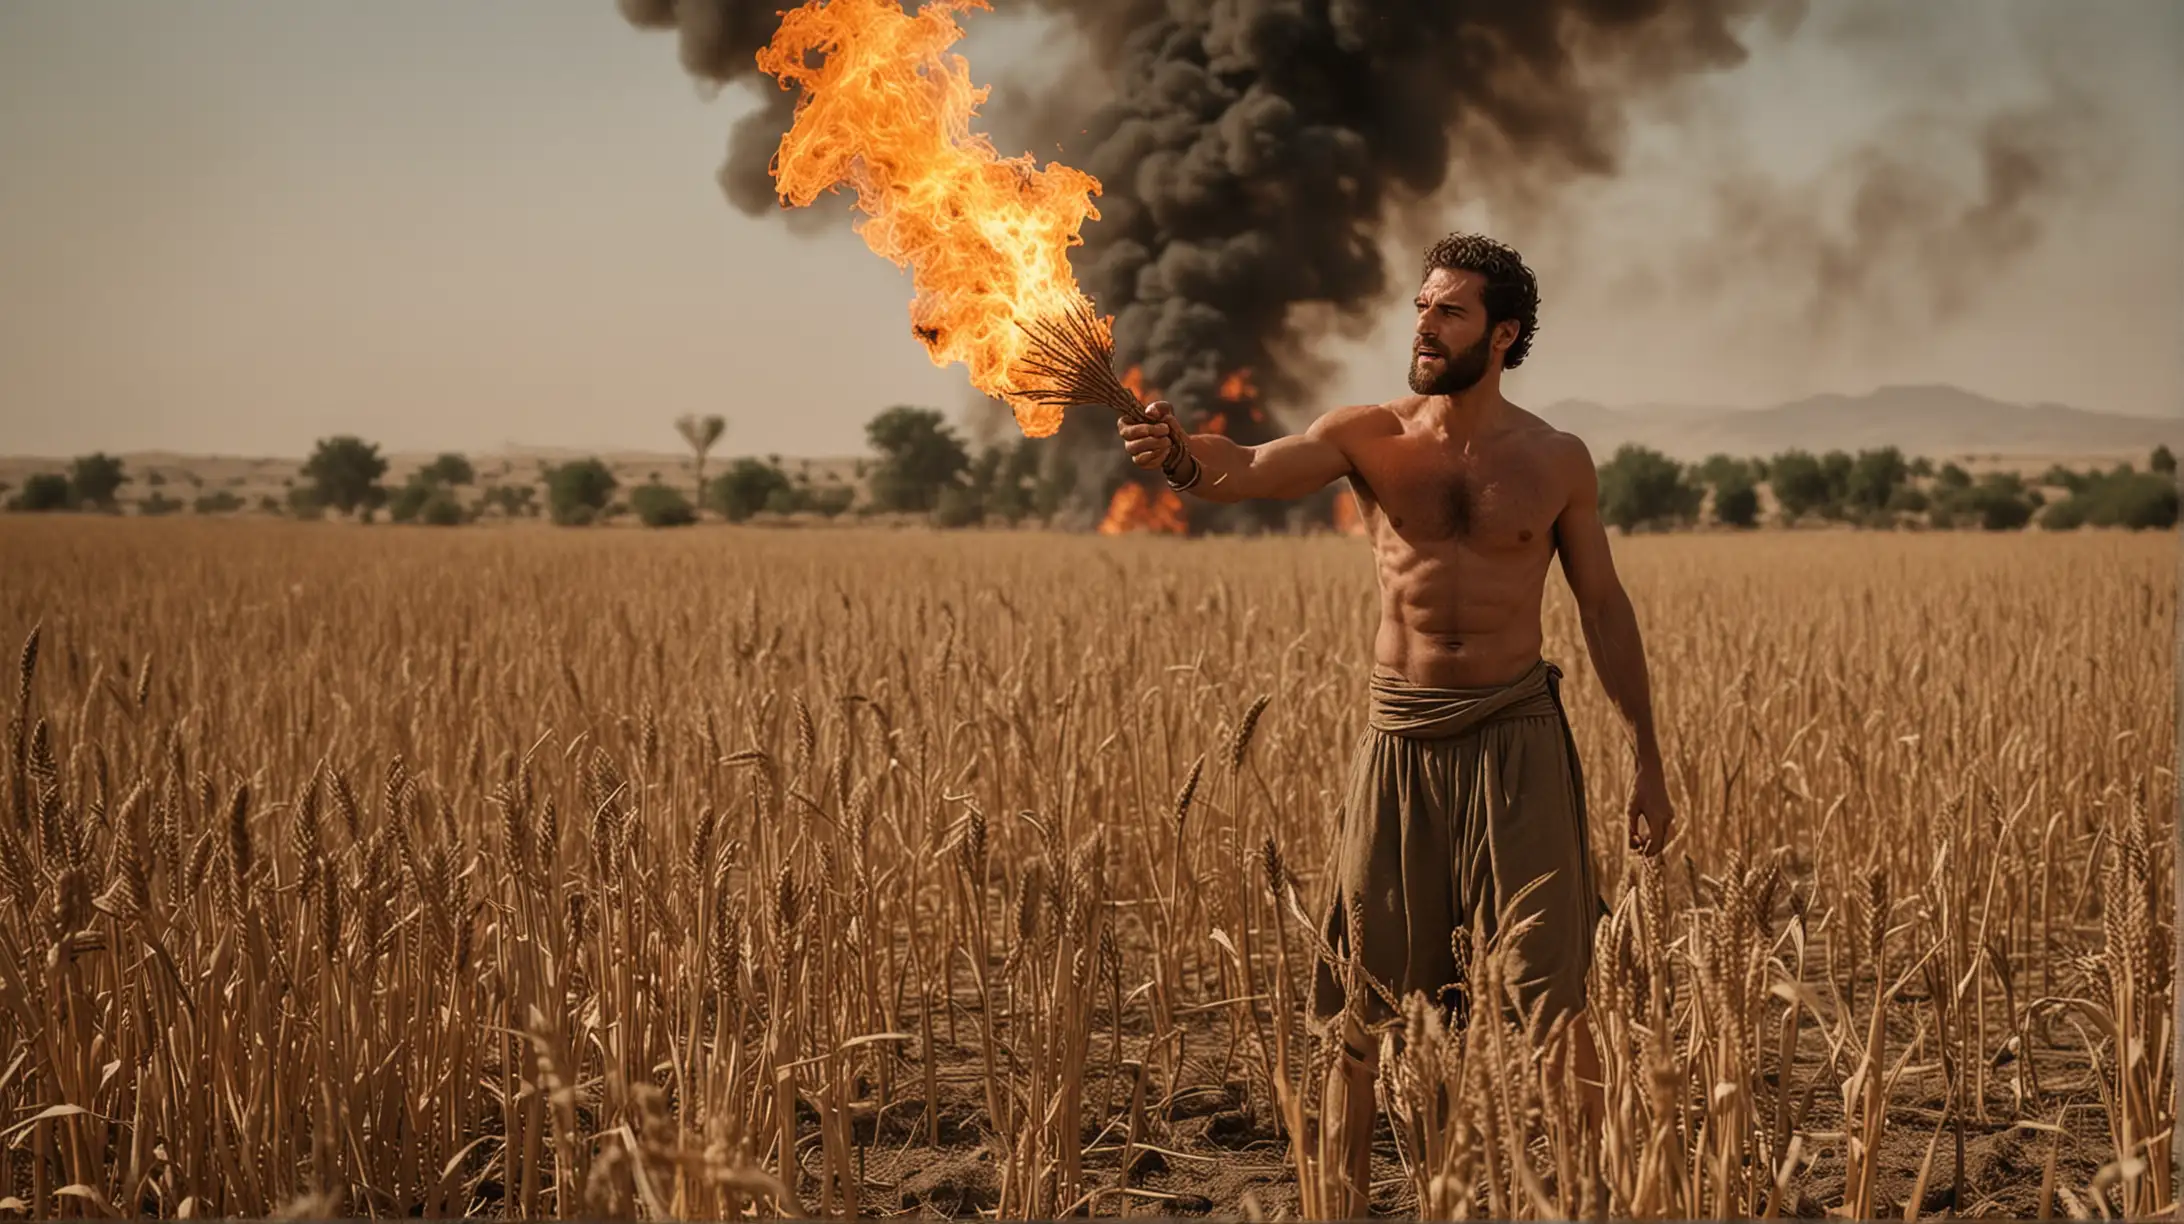 A fit man in a field, setting fire to the crops. Set during the Biblical era of Moses in the Middle East